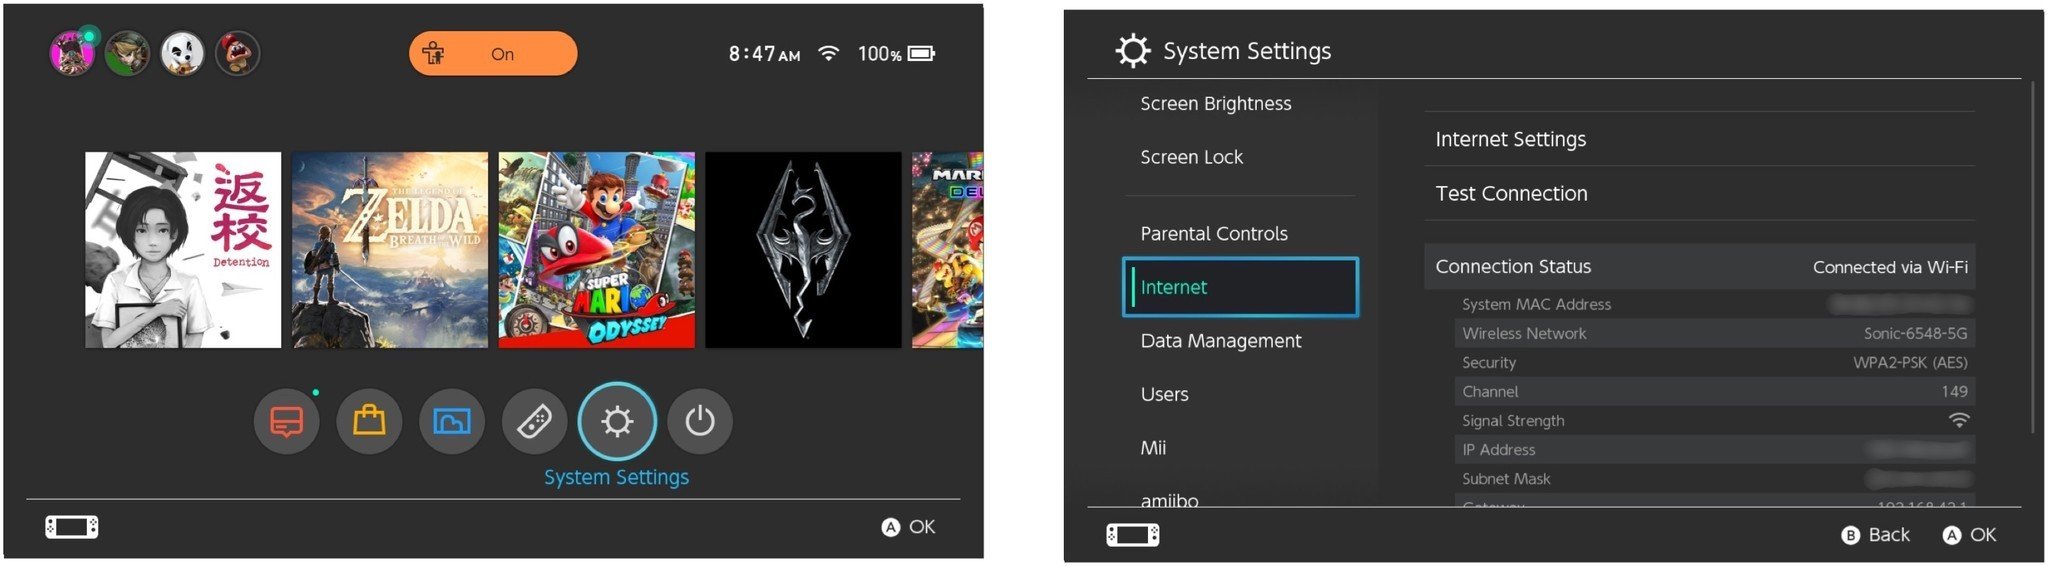 Select System Settings, then Select Internet